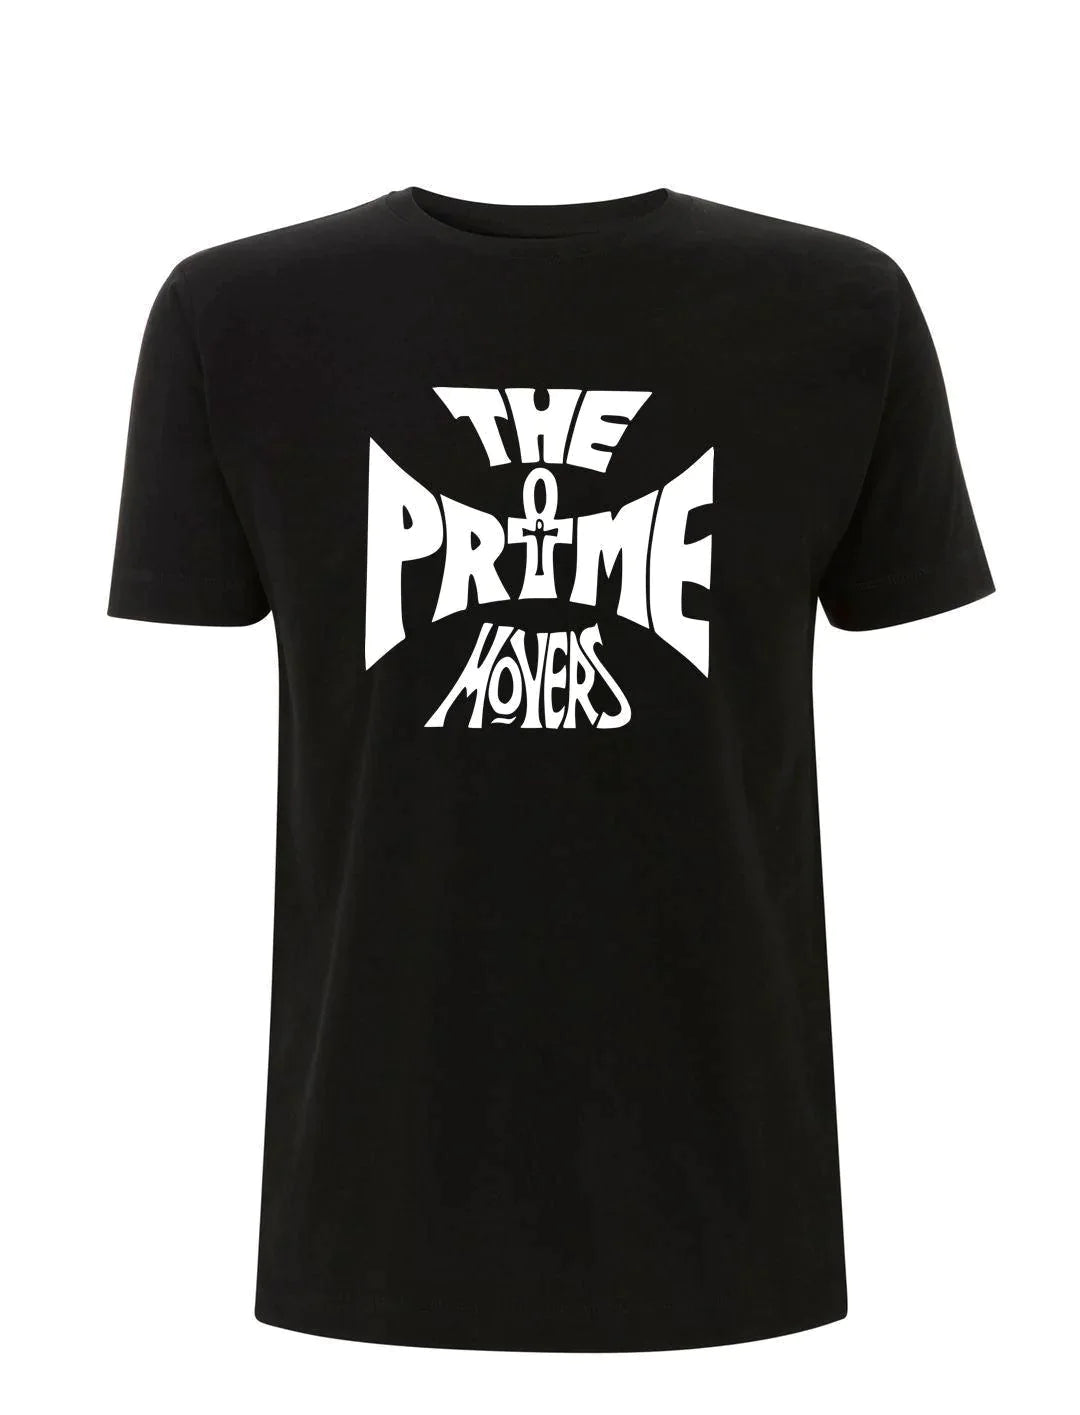 THE PRIME MOVERS: Logo T-Shirt Official Merchandise by Sound is Colour (Many Colours) - SOUND IS COLOUR